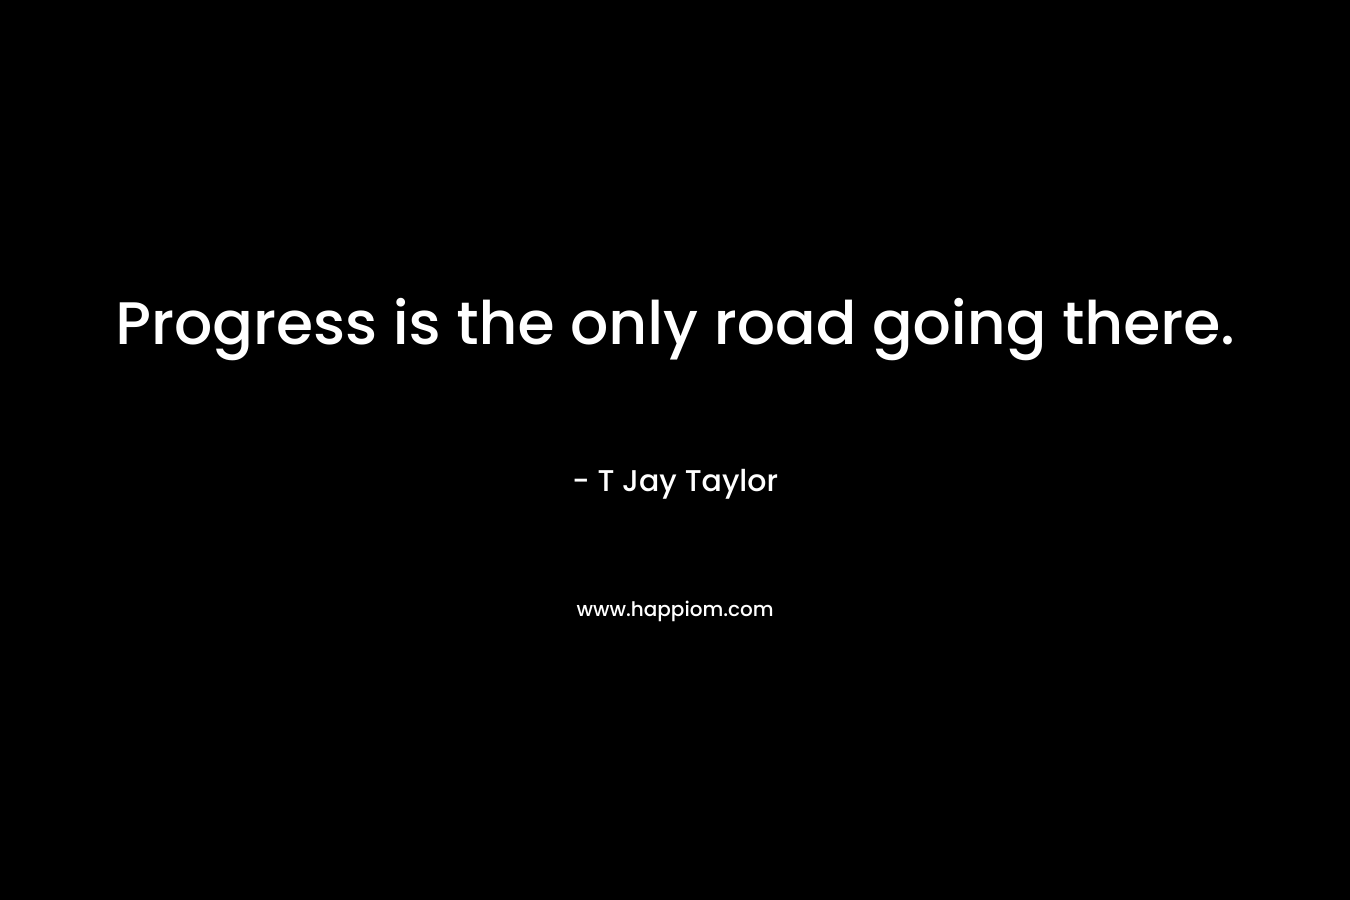 Progress is the only road going there.